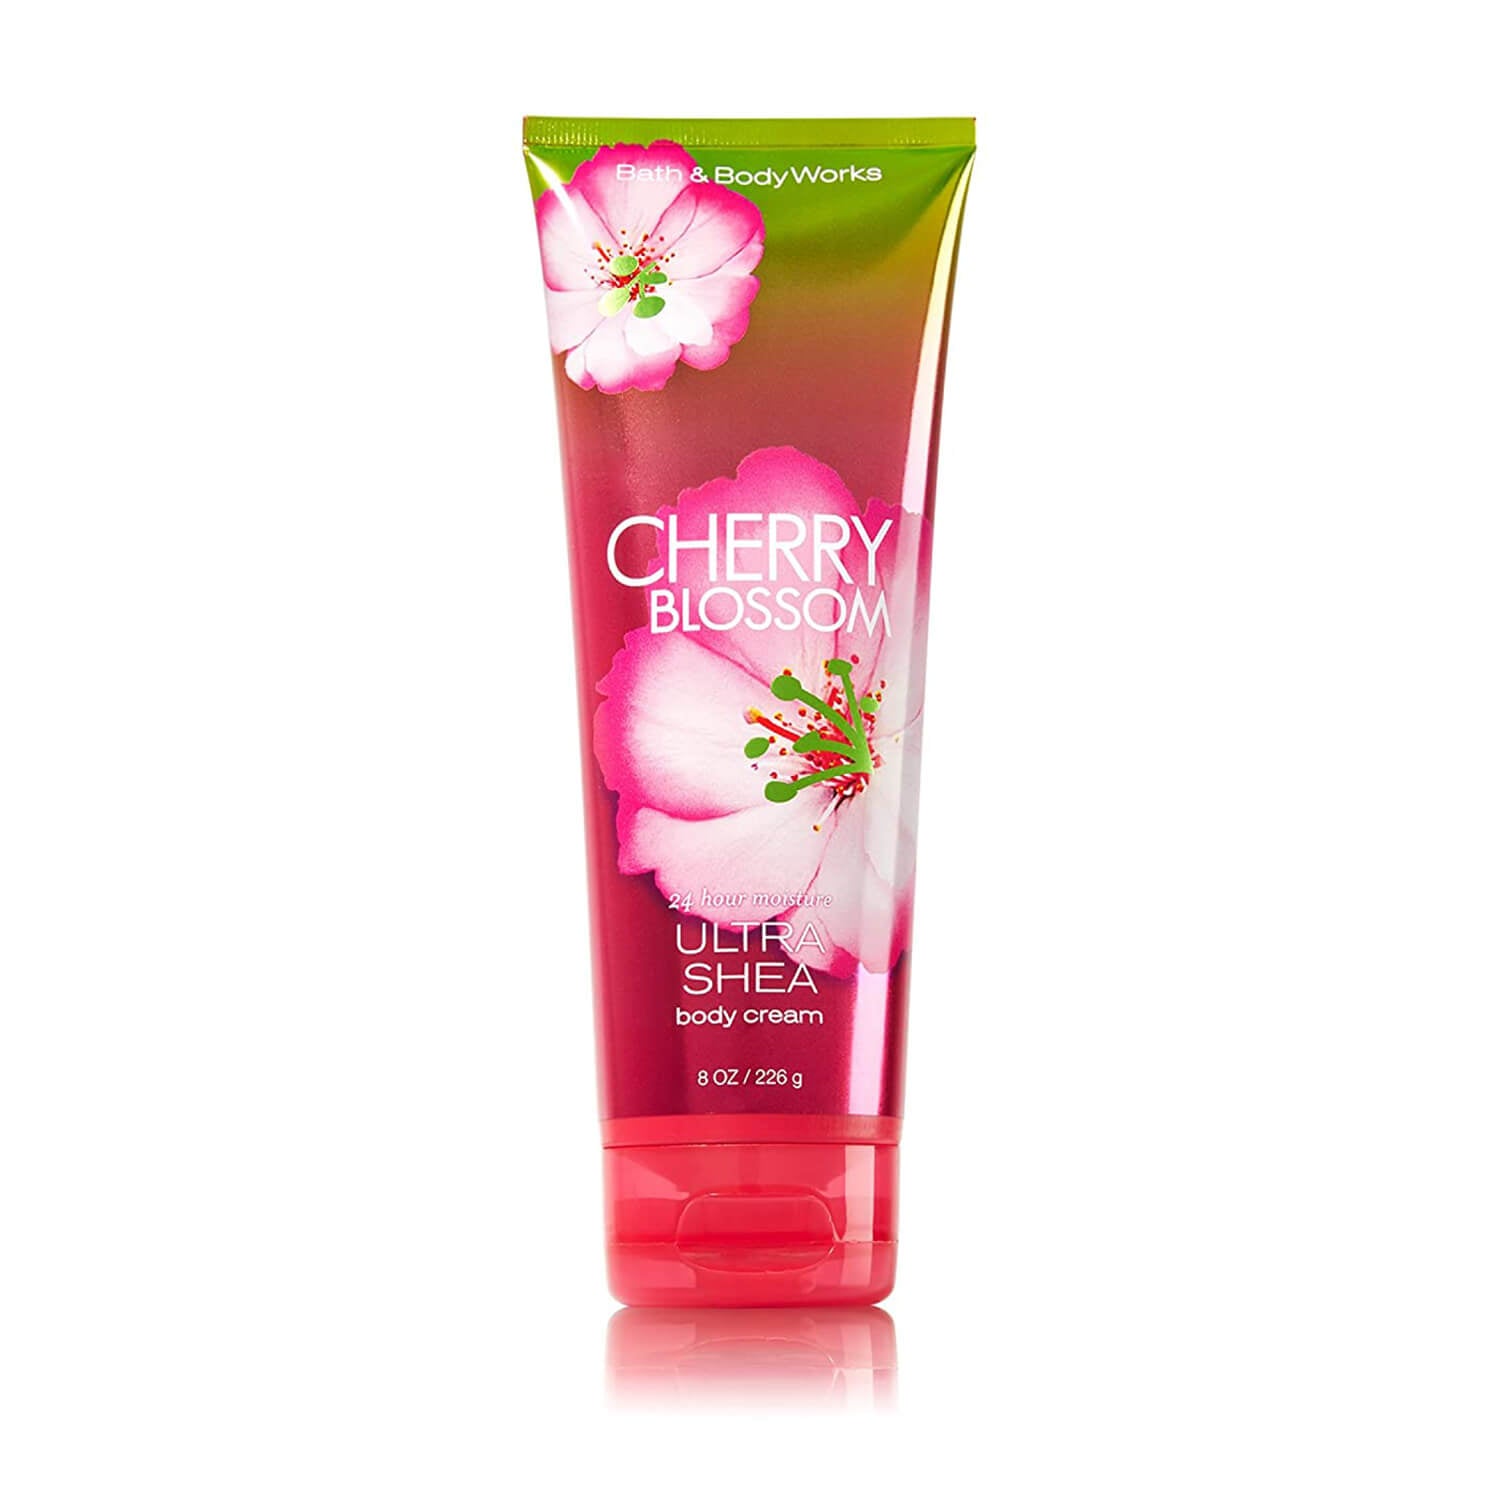 Bath and Body works body cream - Cherry Blossom available at Heygirl.pk for delivery in Karachi, Lahore, Islamabad across Pakistan